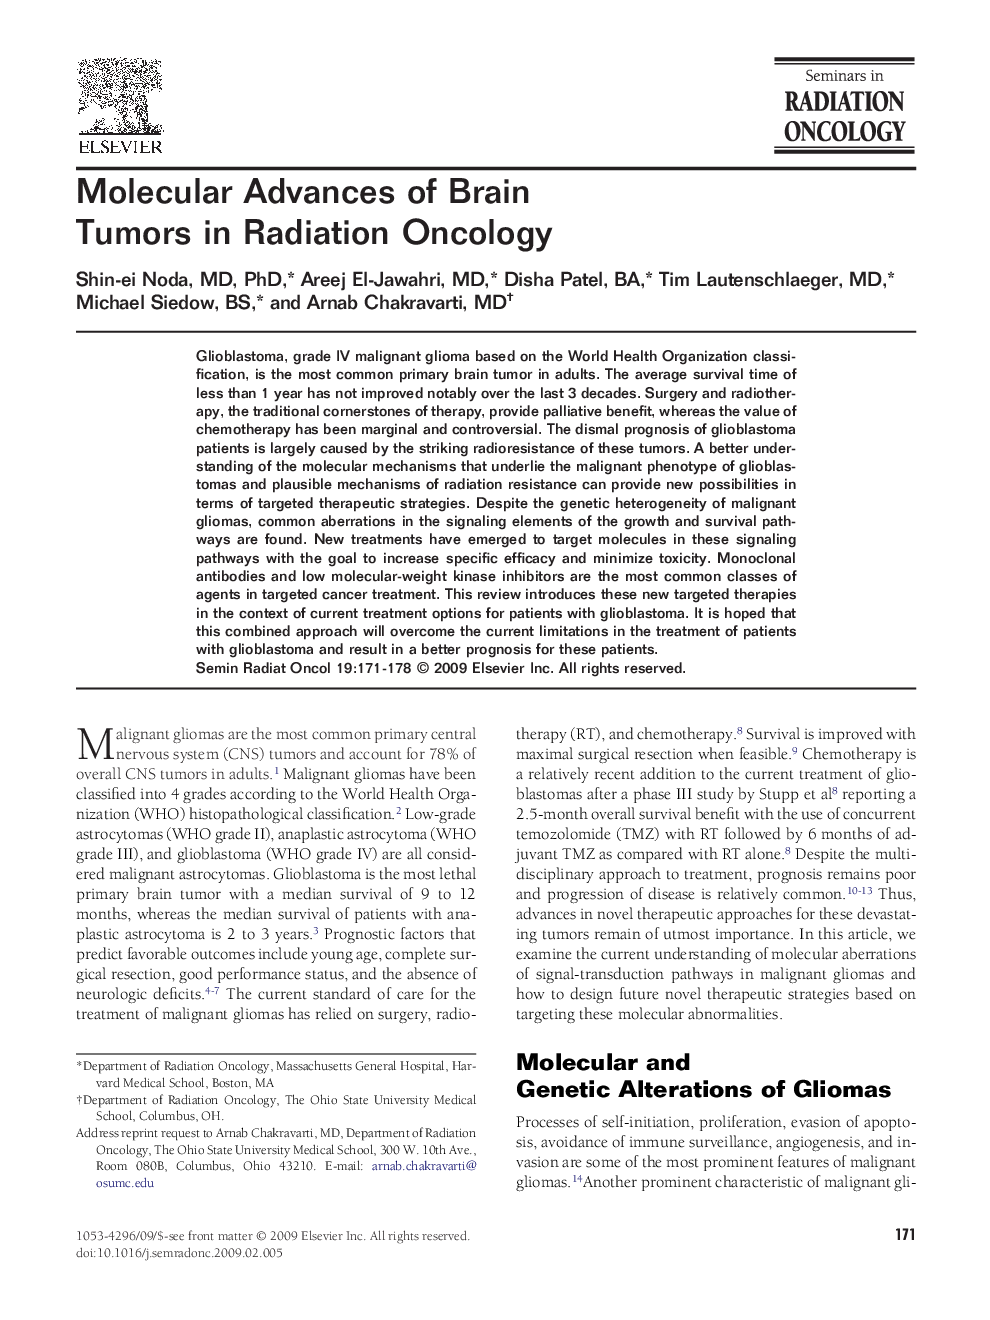 Molecular Advances of Brain Tumors in Radiation Oncology